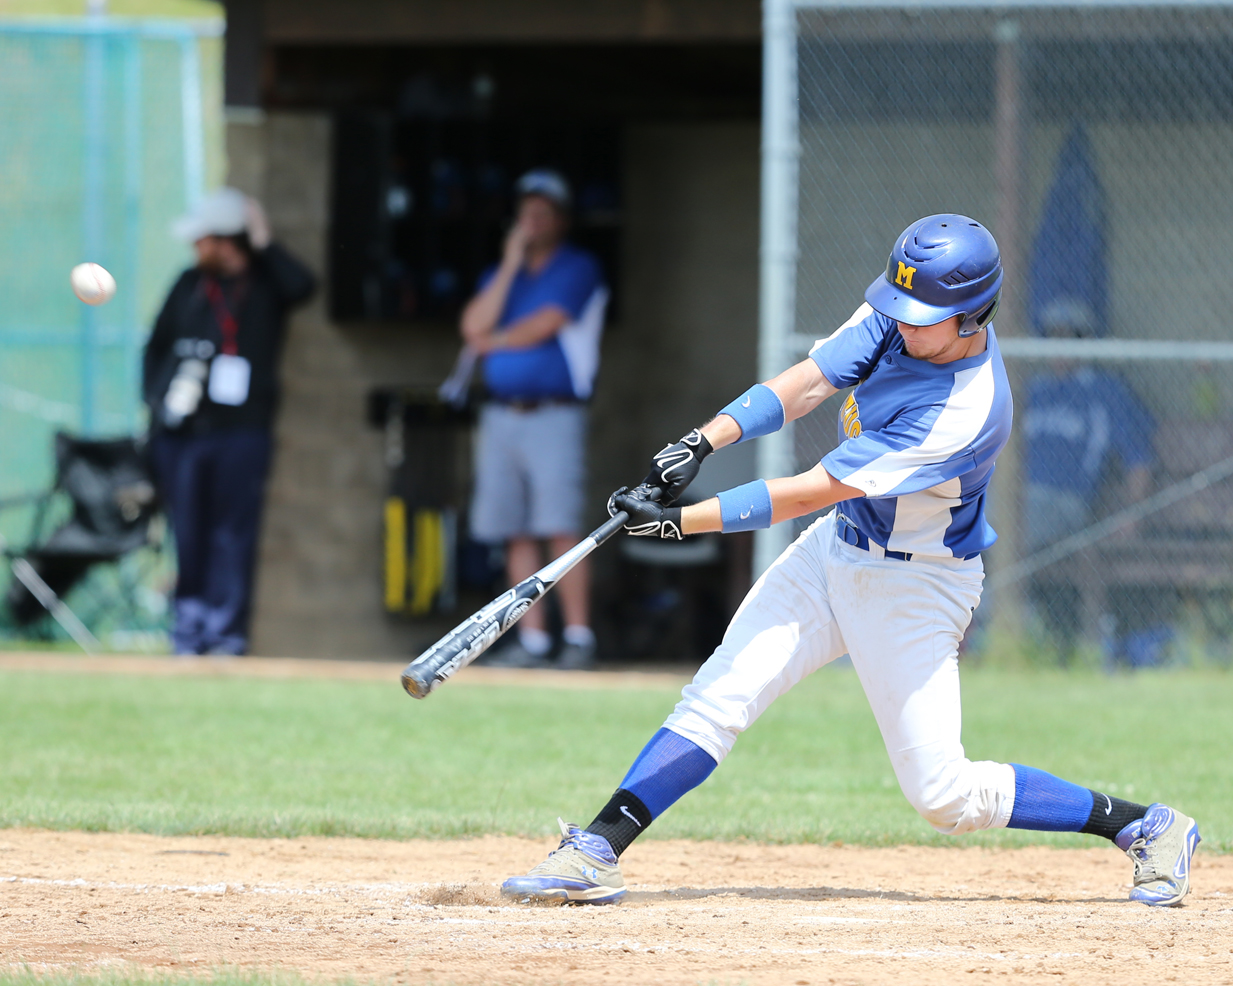 Chris Dwyer hit a double in the 6th inning as Mattituck defeated Ogdensburg Free Academy 7-2. (Credit: Daniel De Mato)